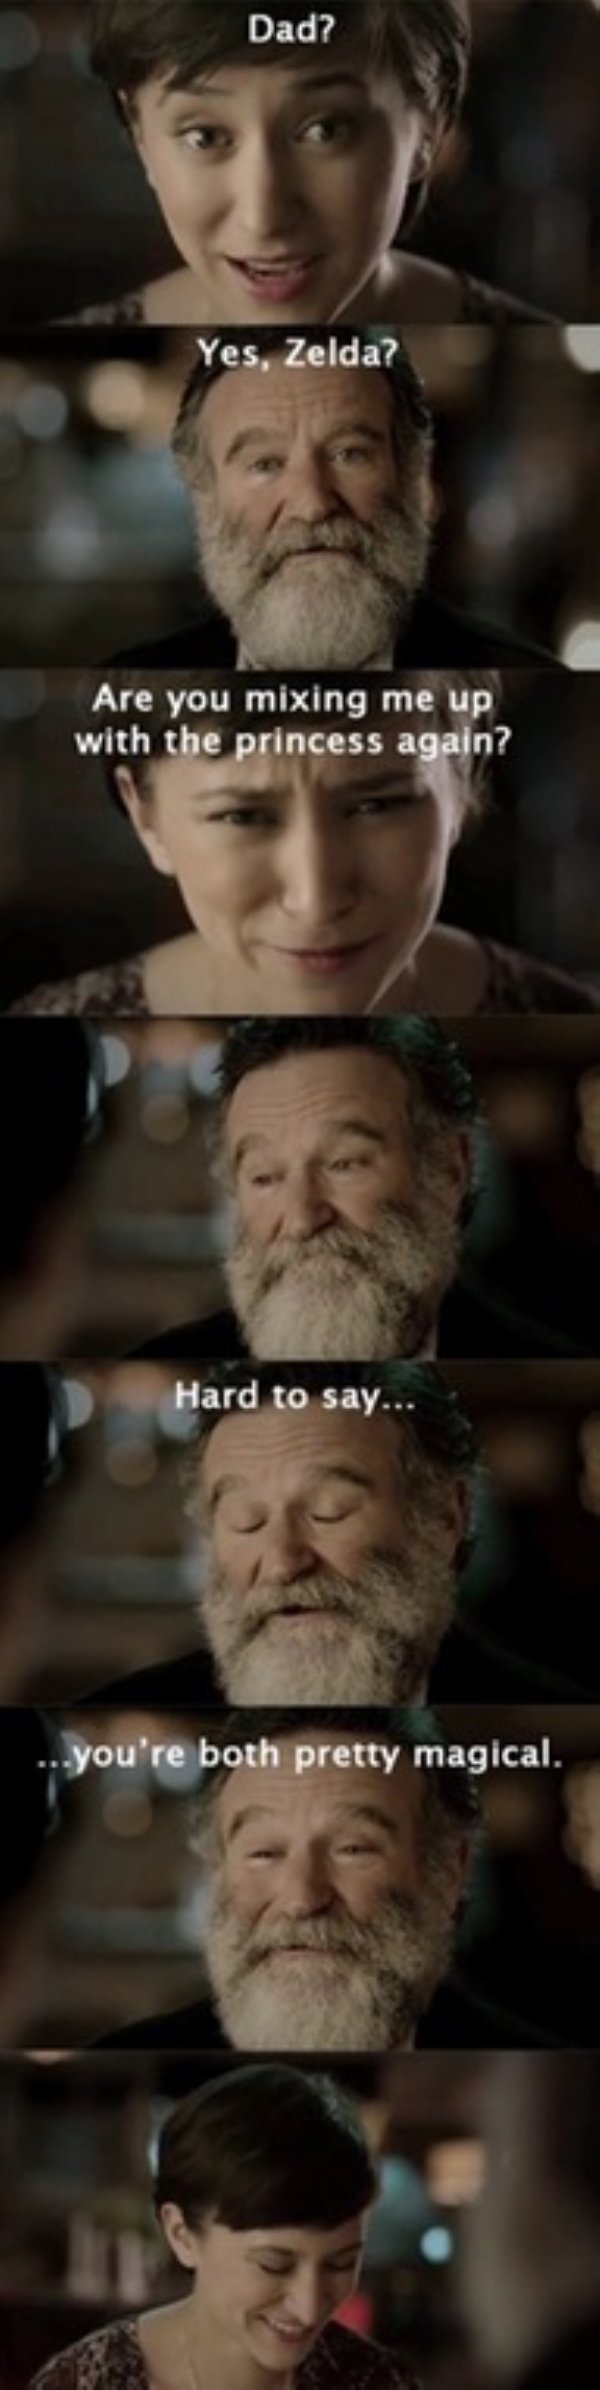 wholesome meme of robin williams zelda meme - Dad? Yes, Zelda? Are you mixing me up with the princess again? Hard to say... you're both pretty magical.